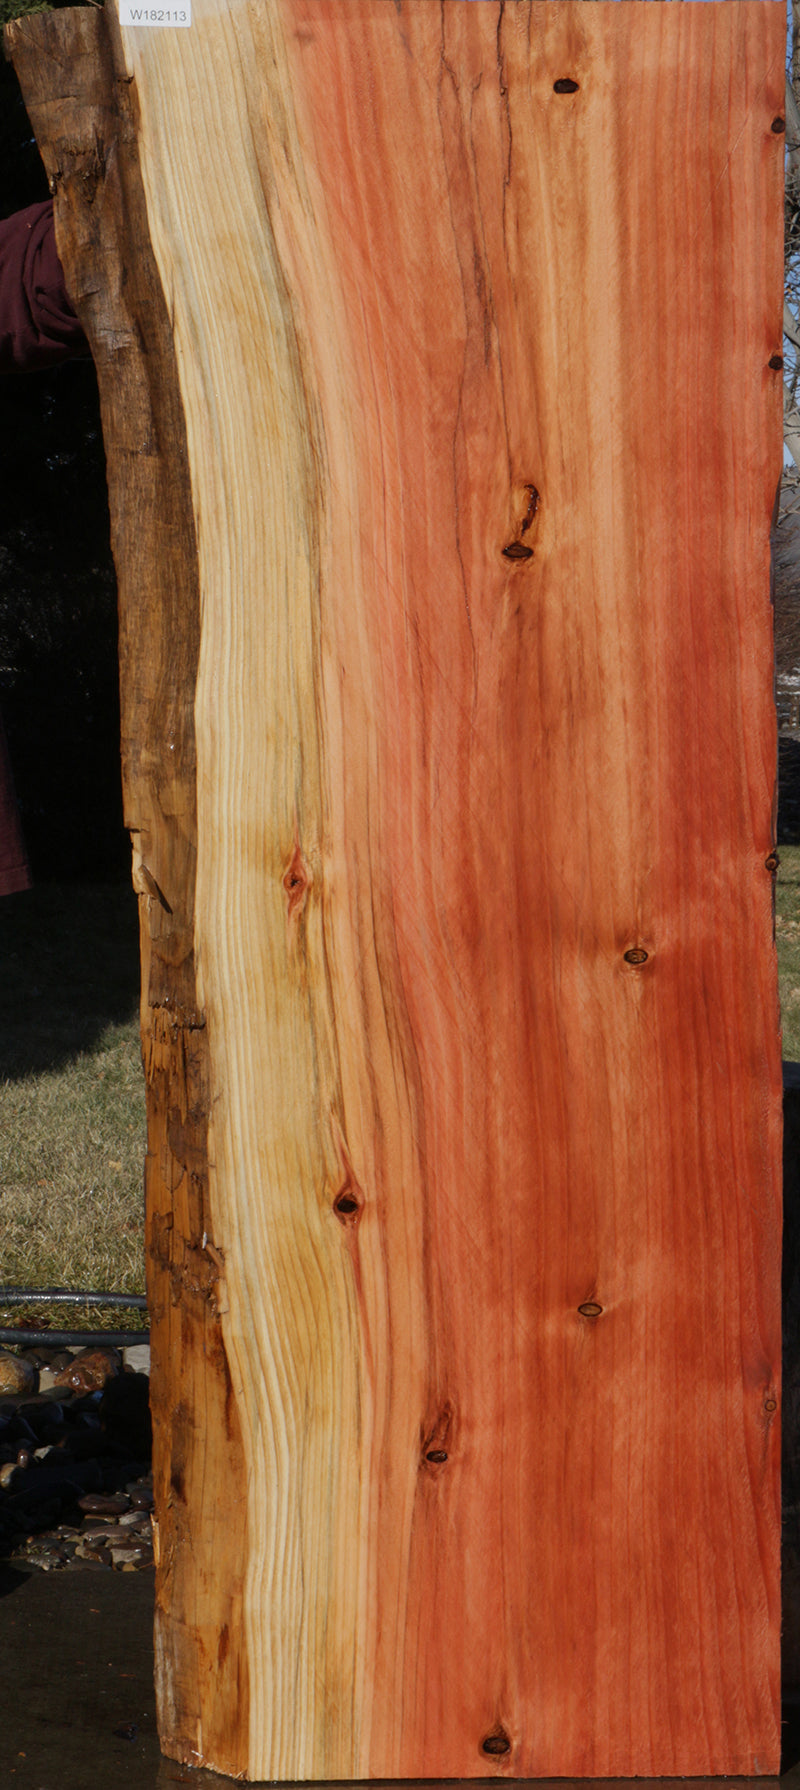 Rustic Sequoia Live Edge Slab (Freight Shipping Required)